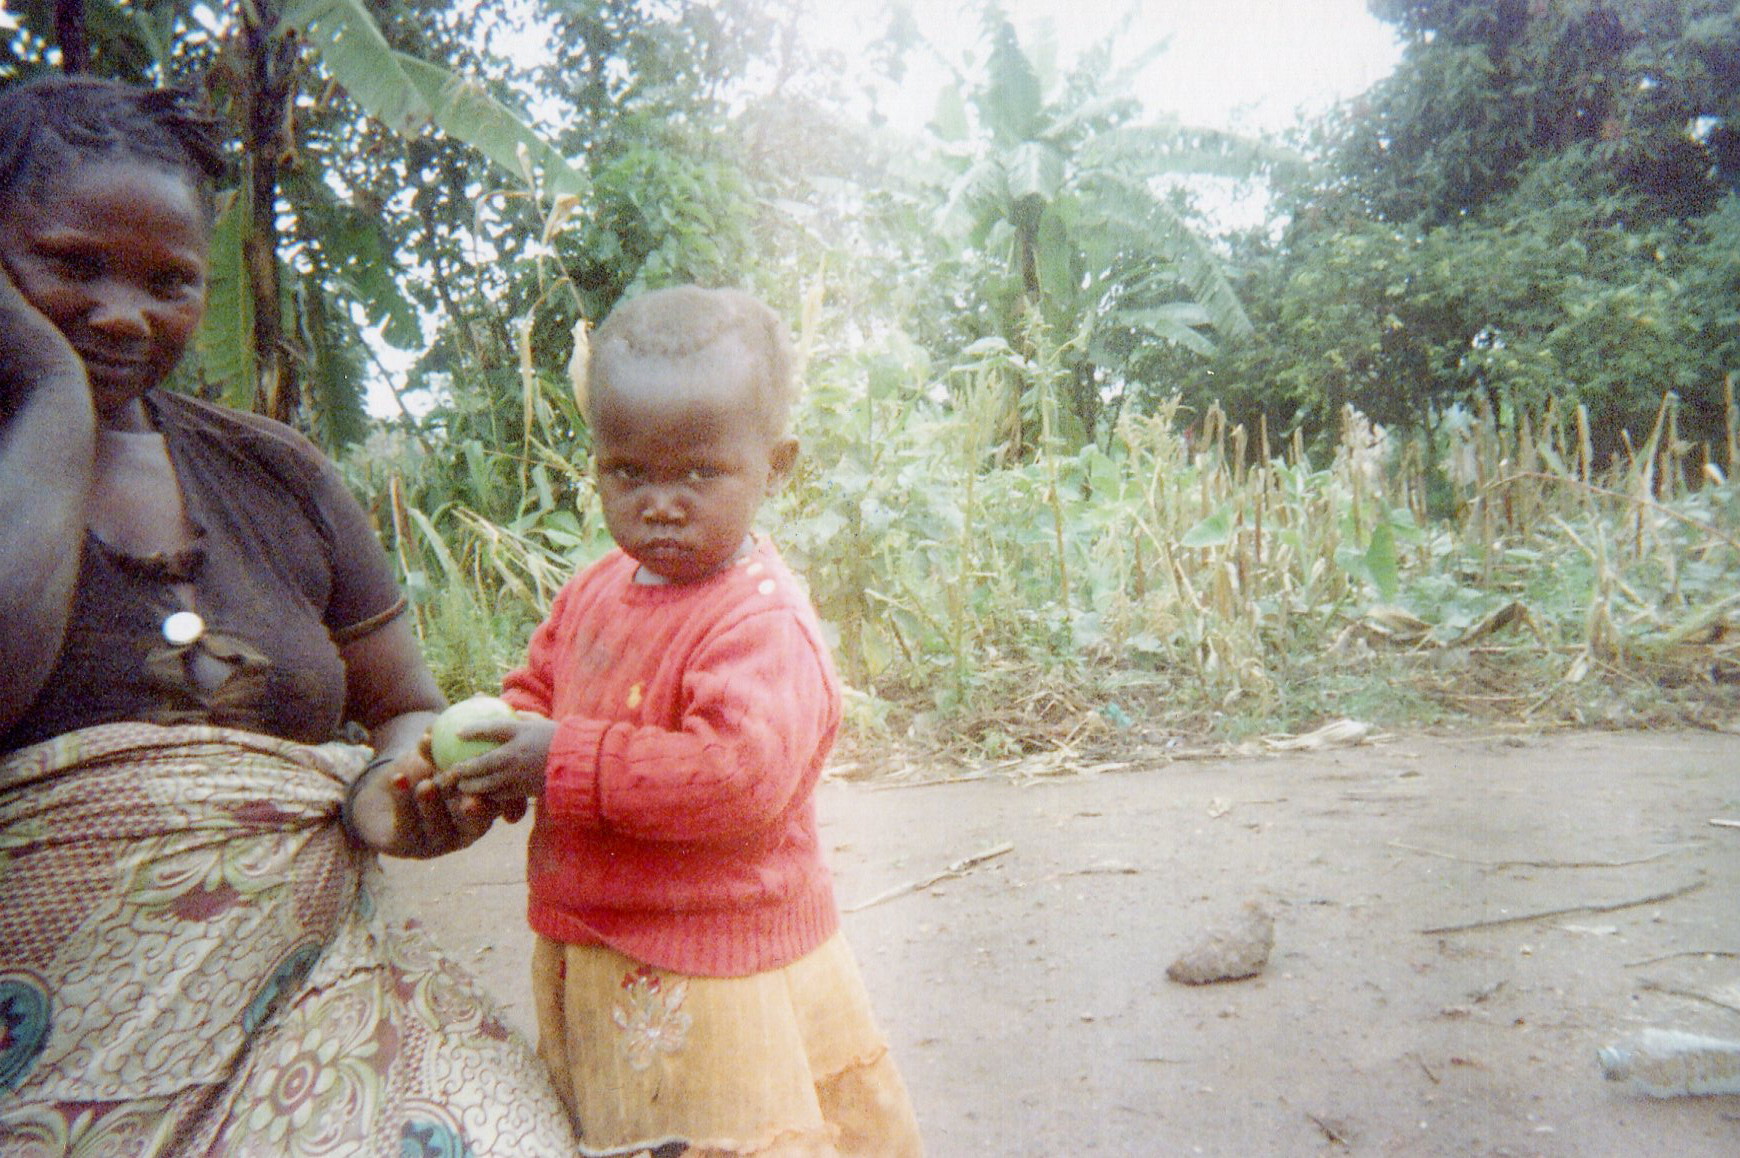  The woman here regrets to feed her child only with fruits, without other necessary food for his health.&nbsp; 